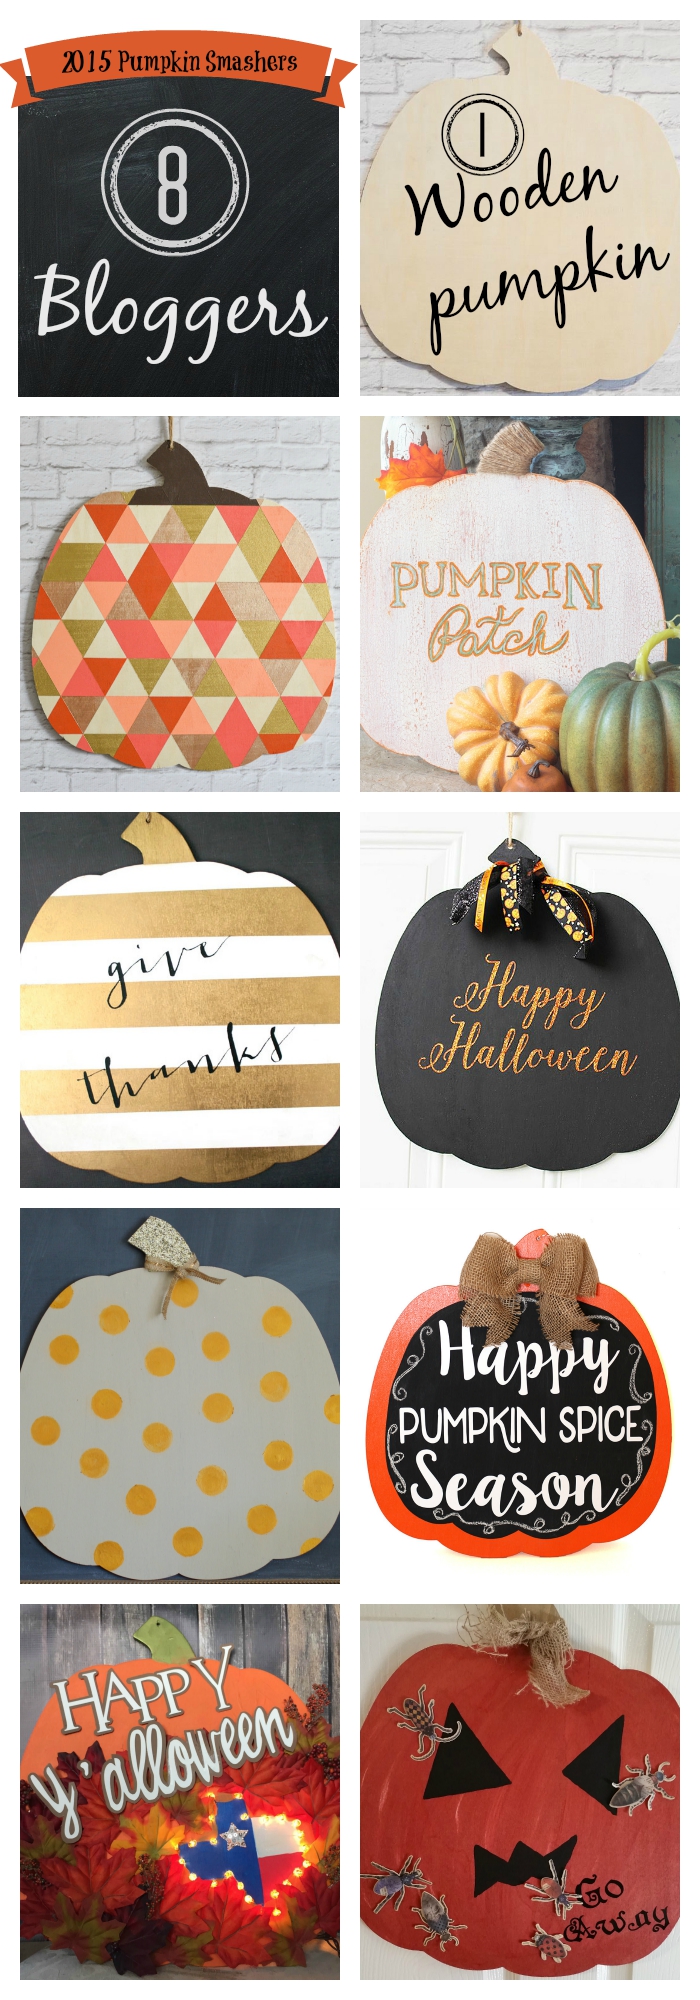 2015 Pumpkin Smashers Blog Hop. How to decorate a plain wooden pumpkin for Halloween. See how easy it is to use Fusion Mineral Paint and DecoArt Metallic Lustre. Also has a blog hop featuring 7 other bloggers decorating the same pumpkin. The possibilities are endless!